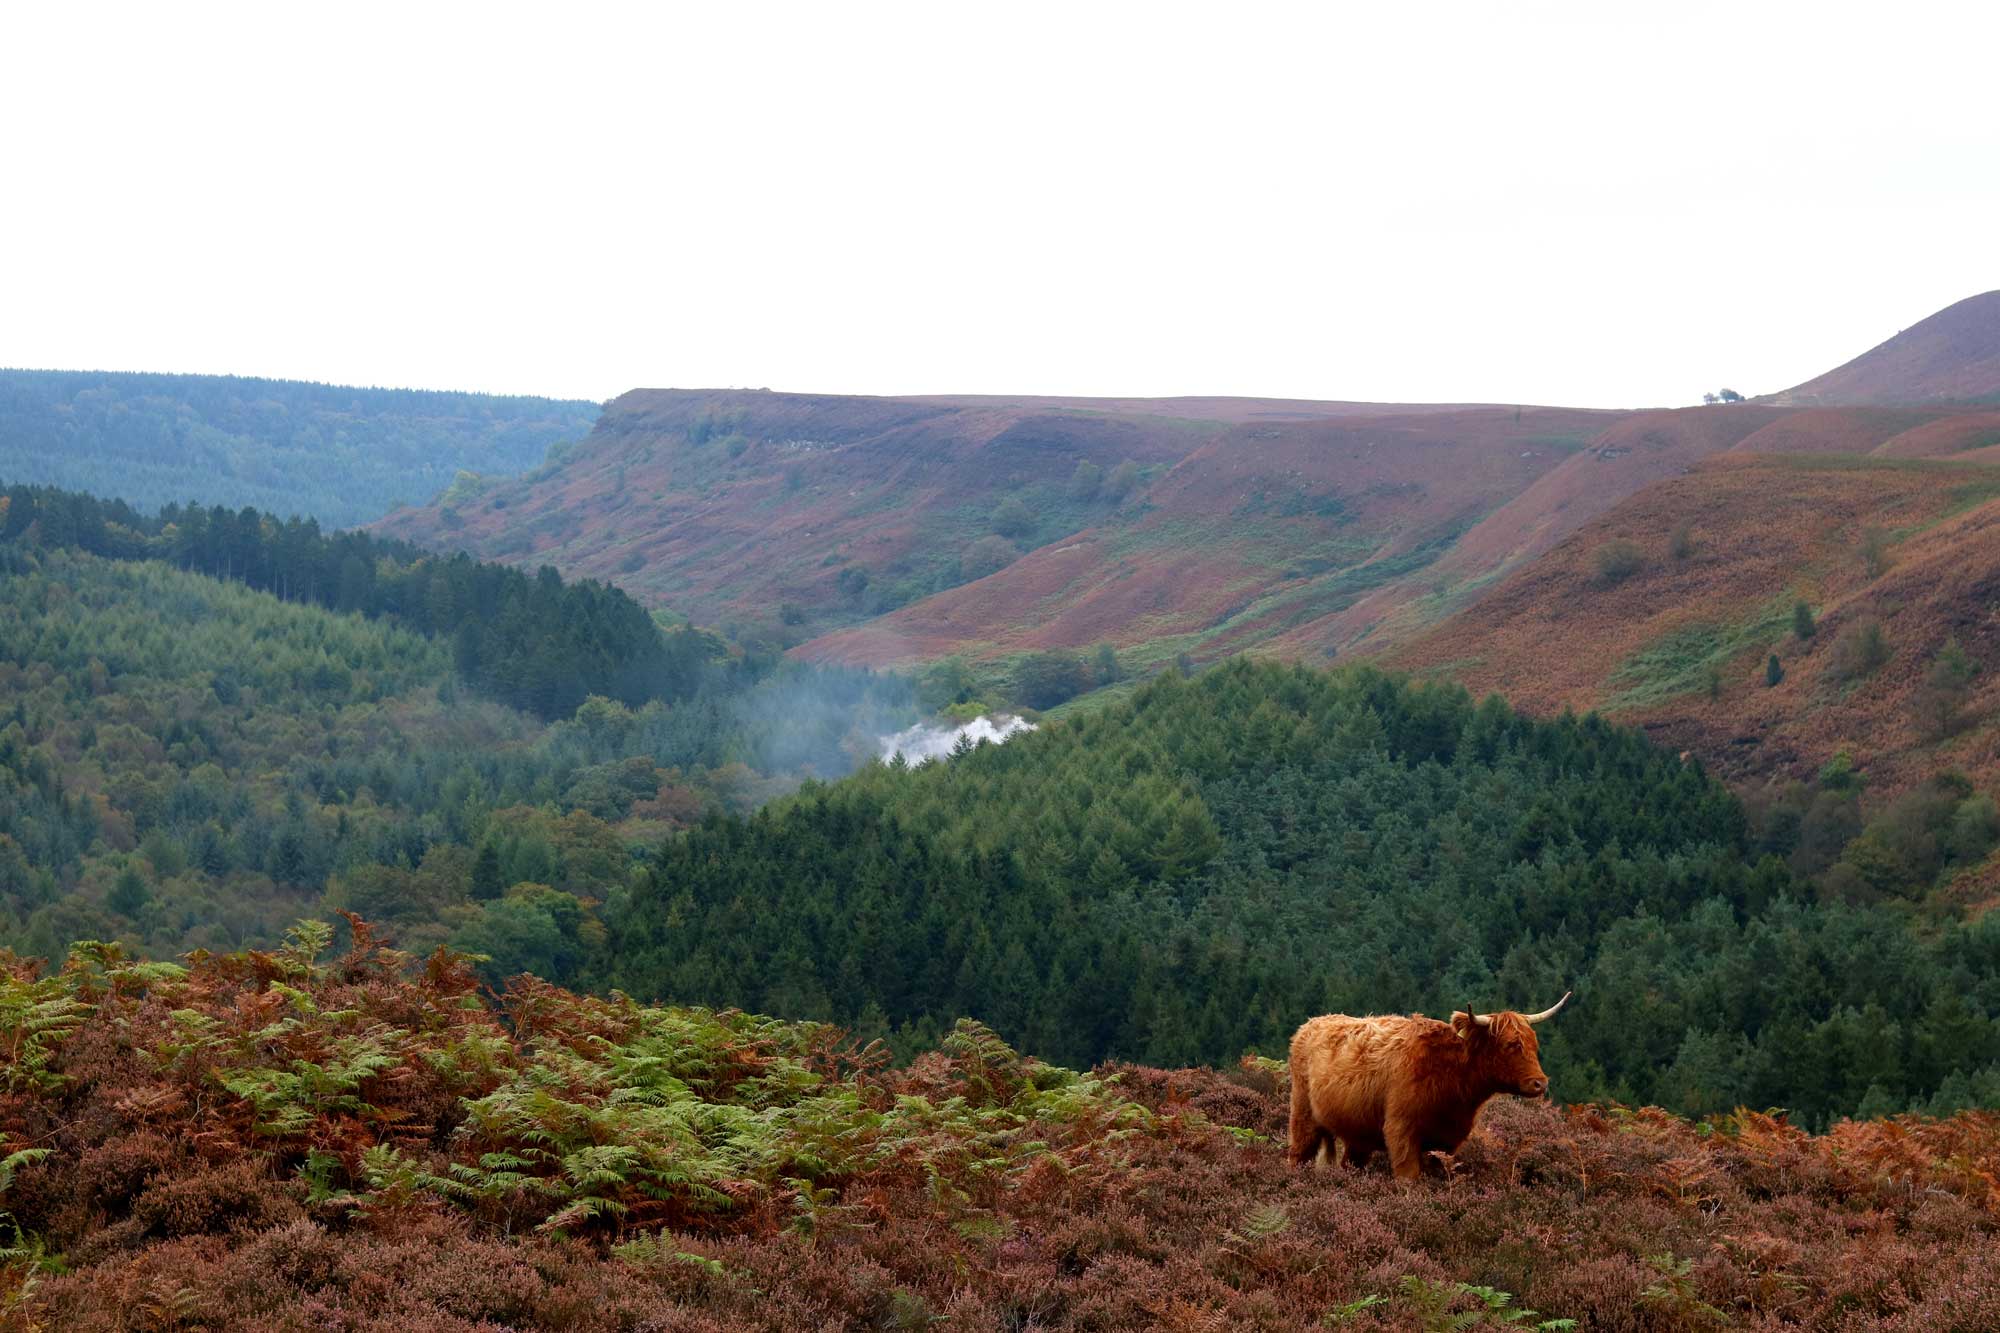 Moorland and wooded landscape with a highland cow in the foreground. Credit Alasdair Fagan.